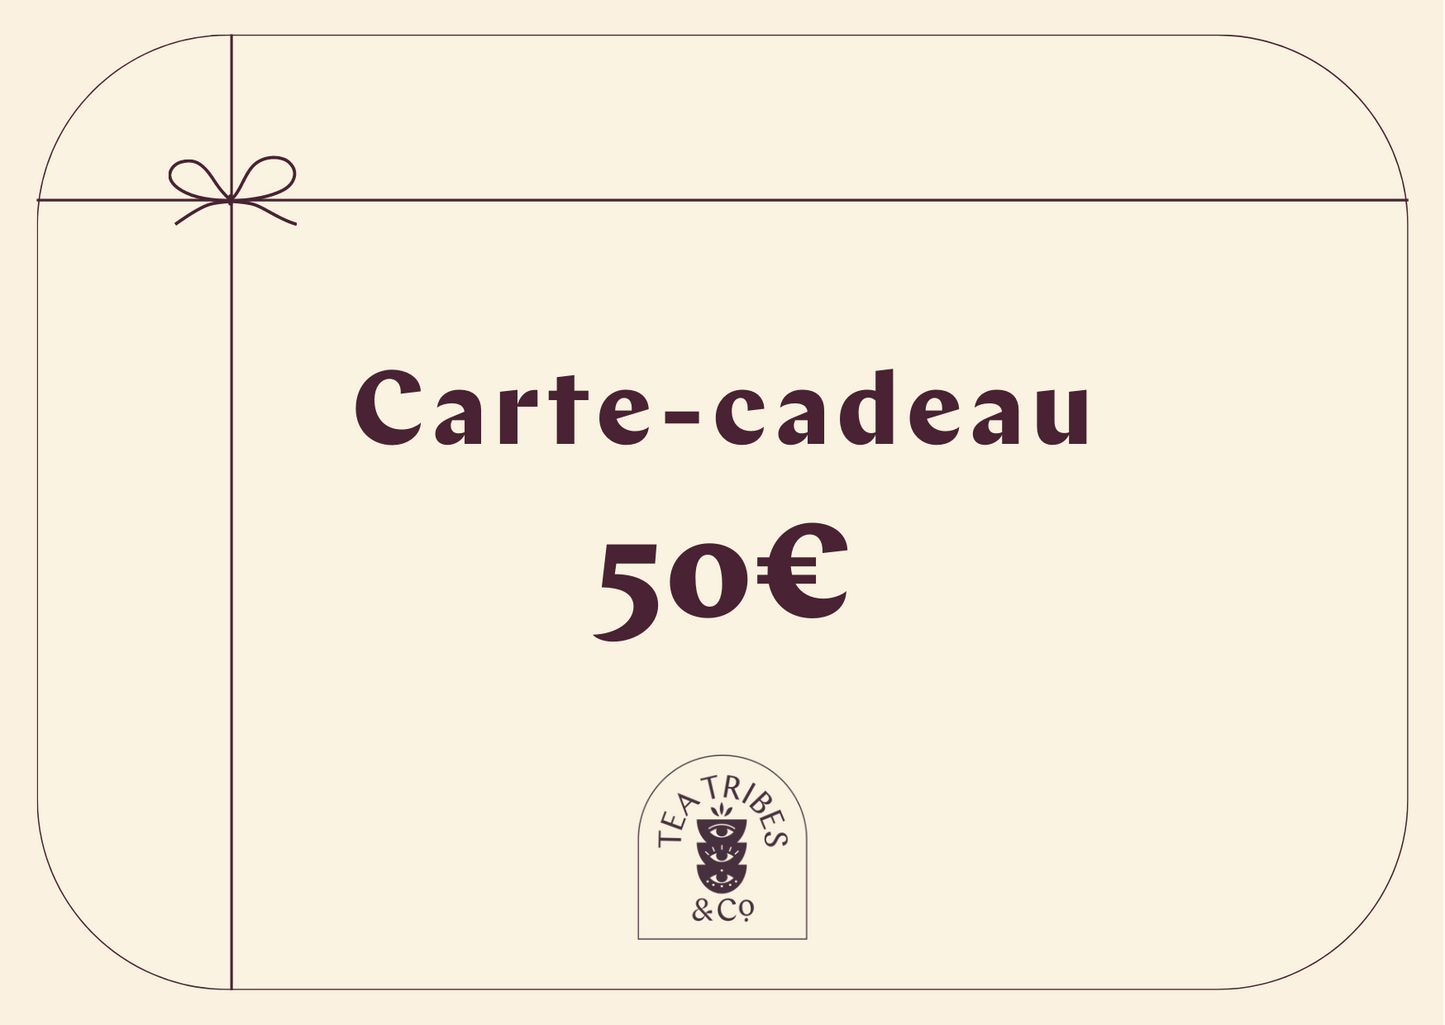 30, 50 or 75 € gift card (your choice!)